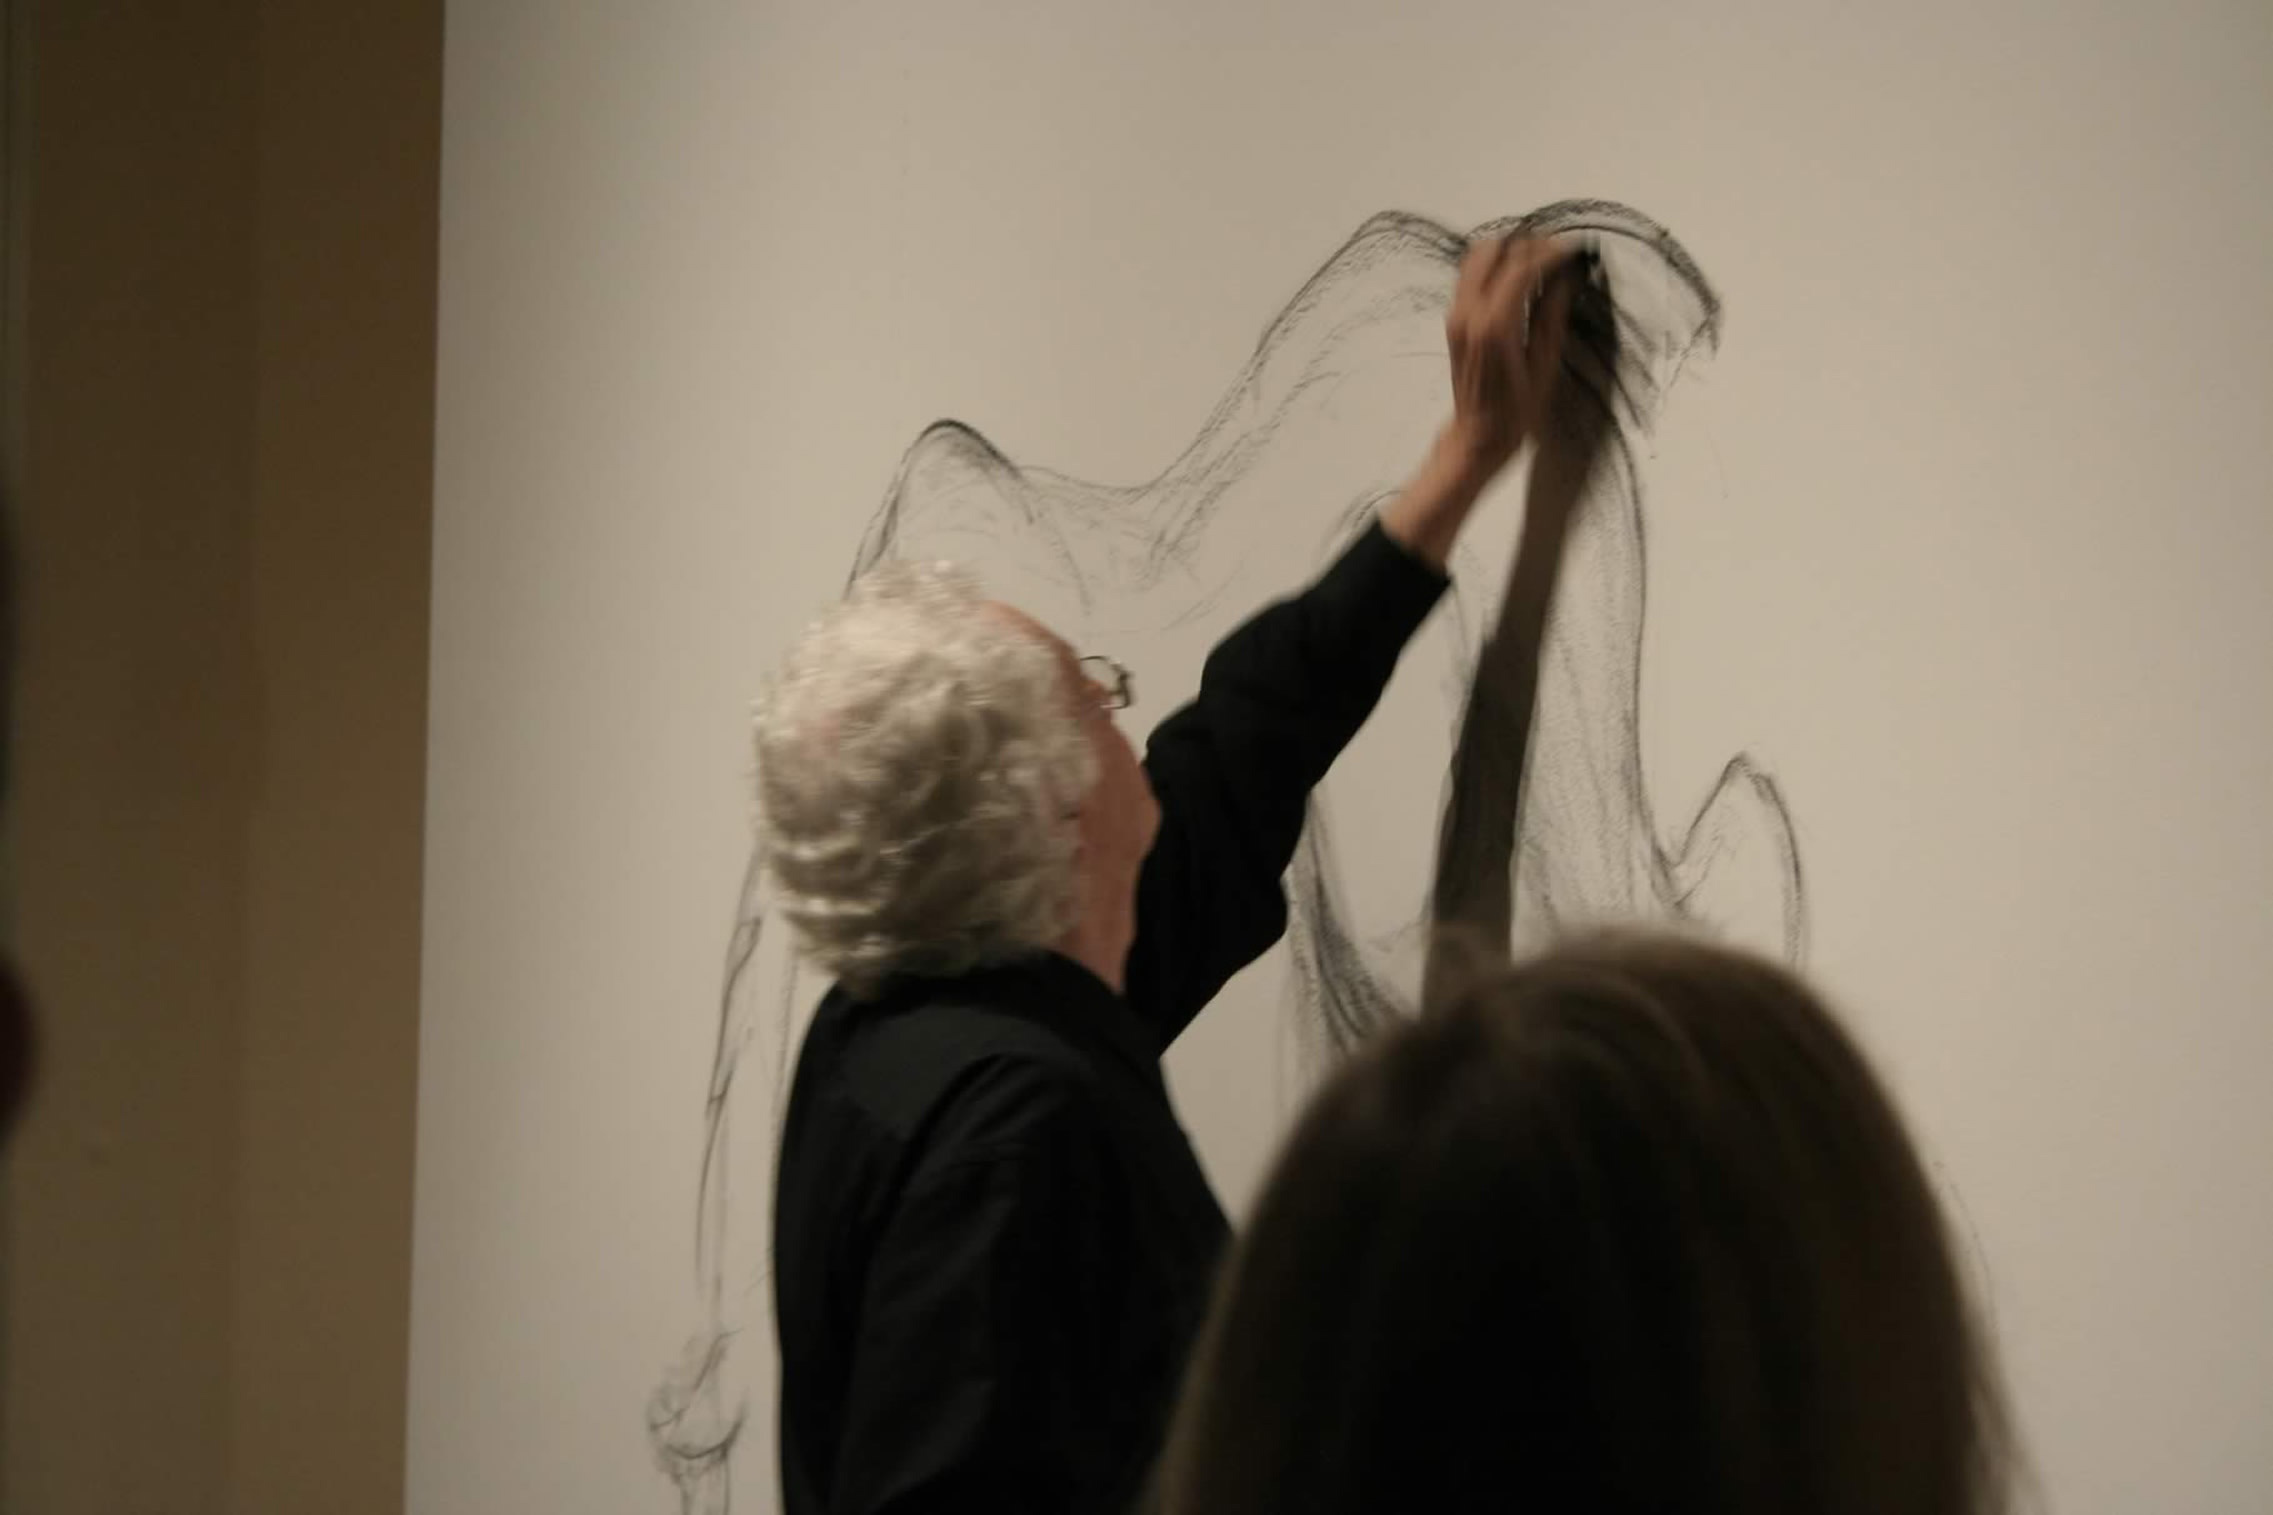 Patrick Oliphant drawing on a wall while people watch